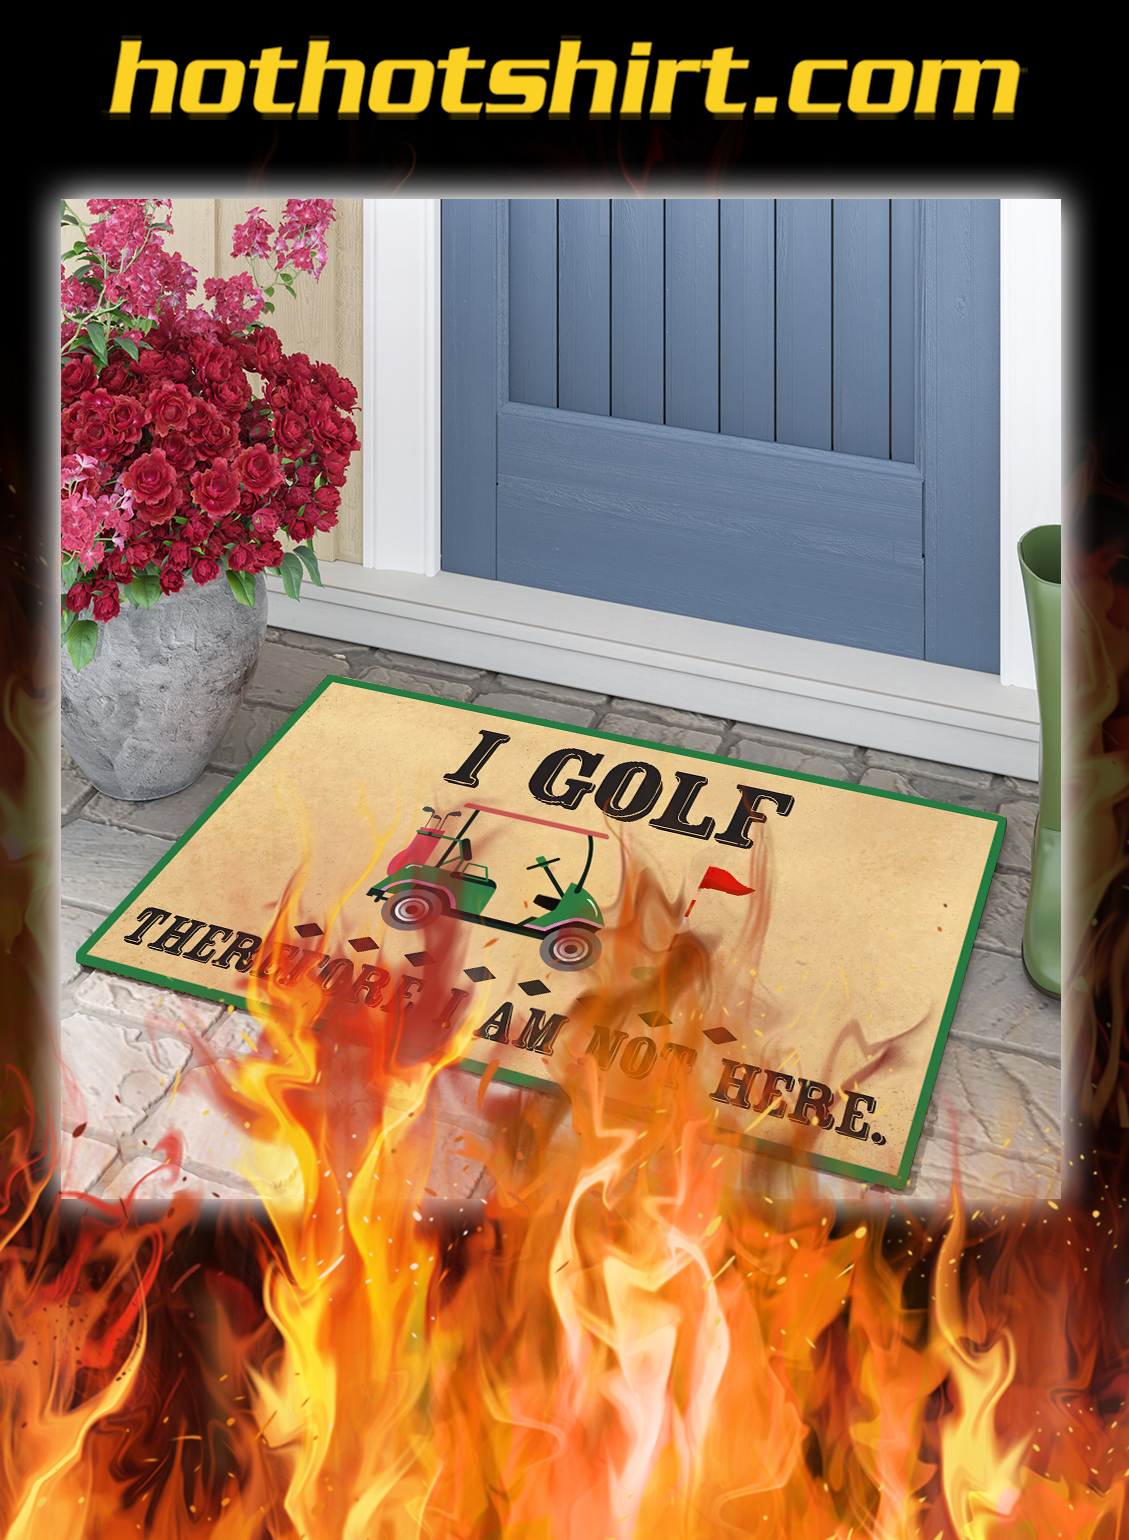 I golf therefore i am not here doormat